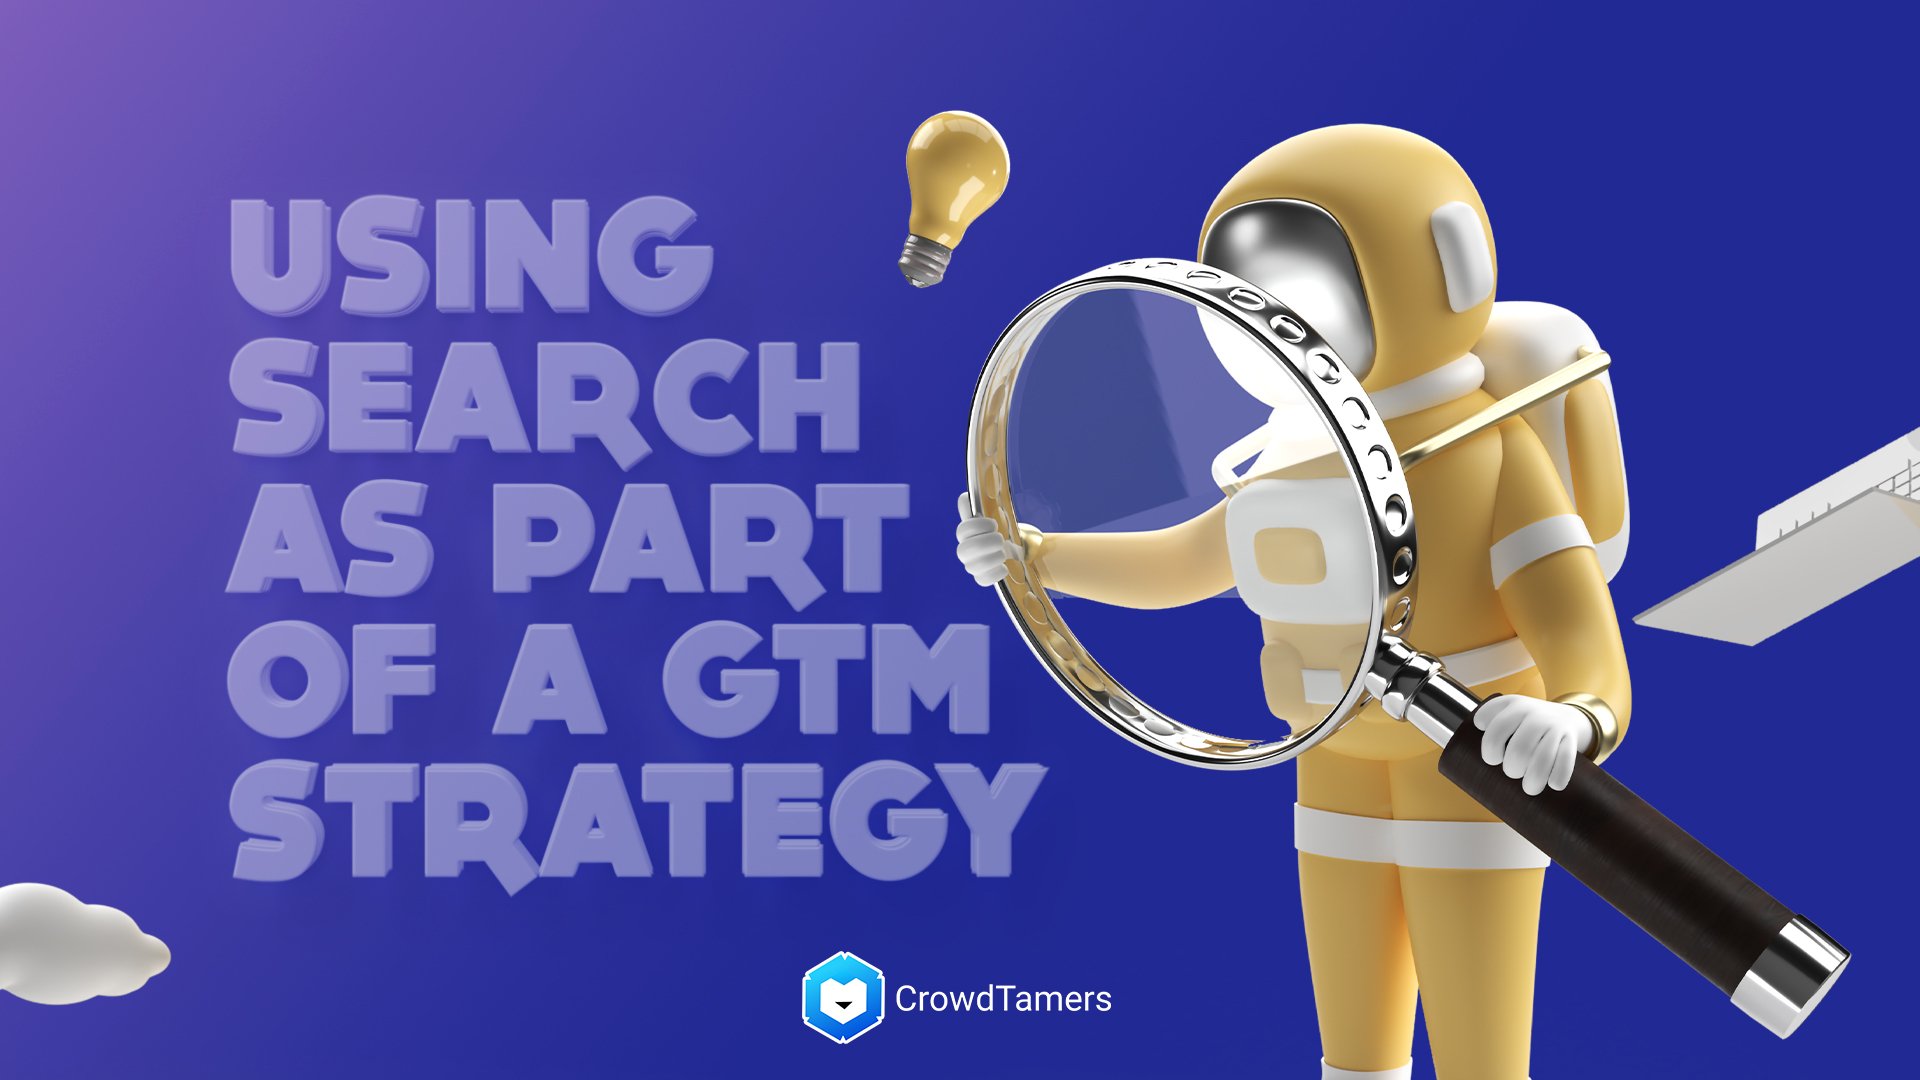 Using Google Search as part of your GTM strategy